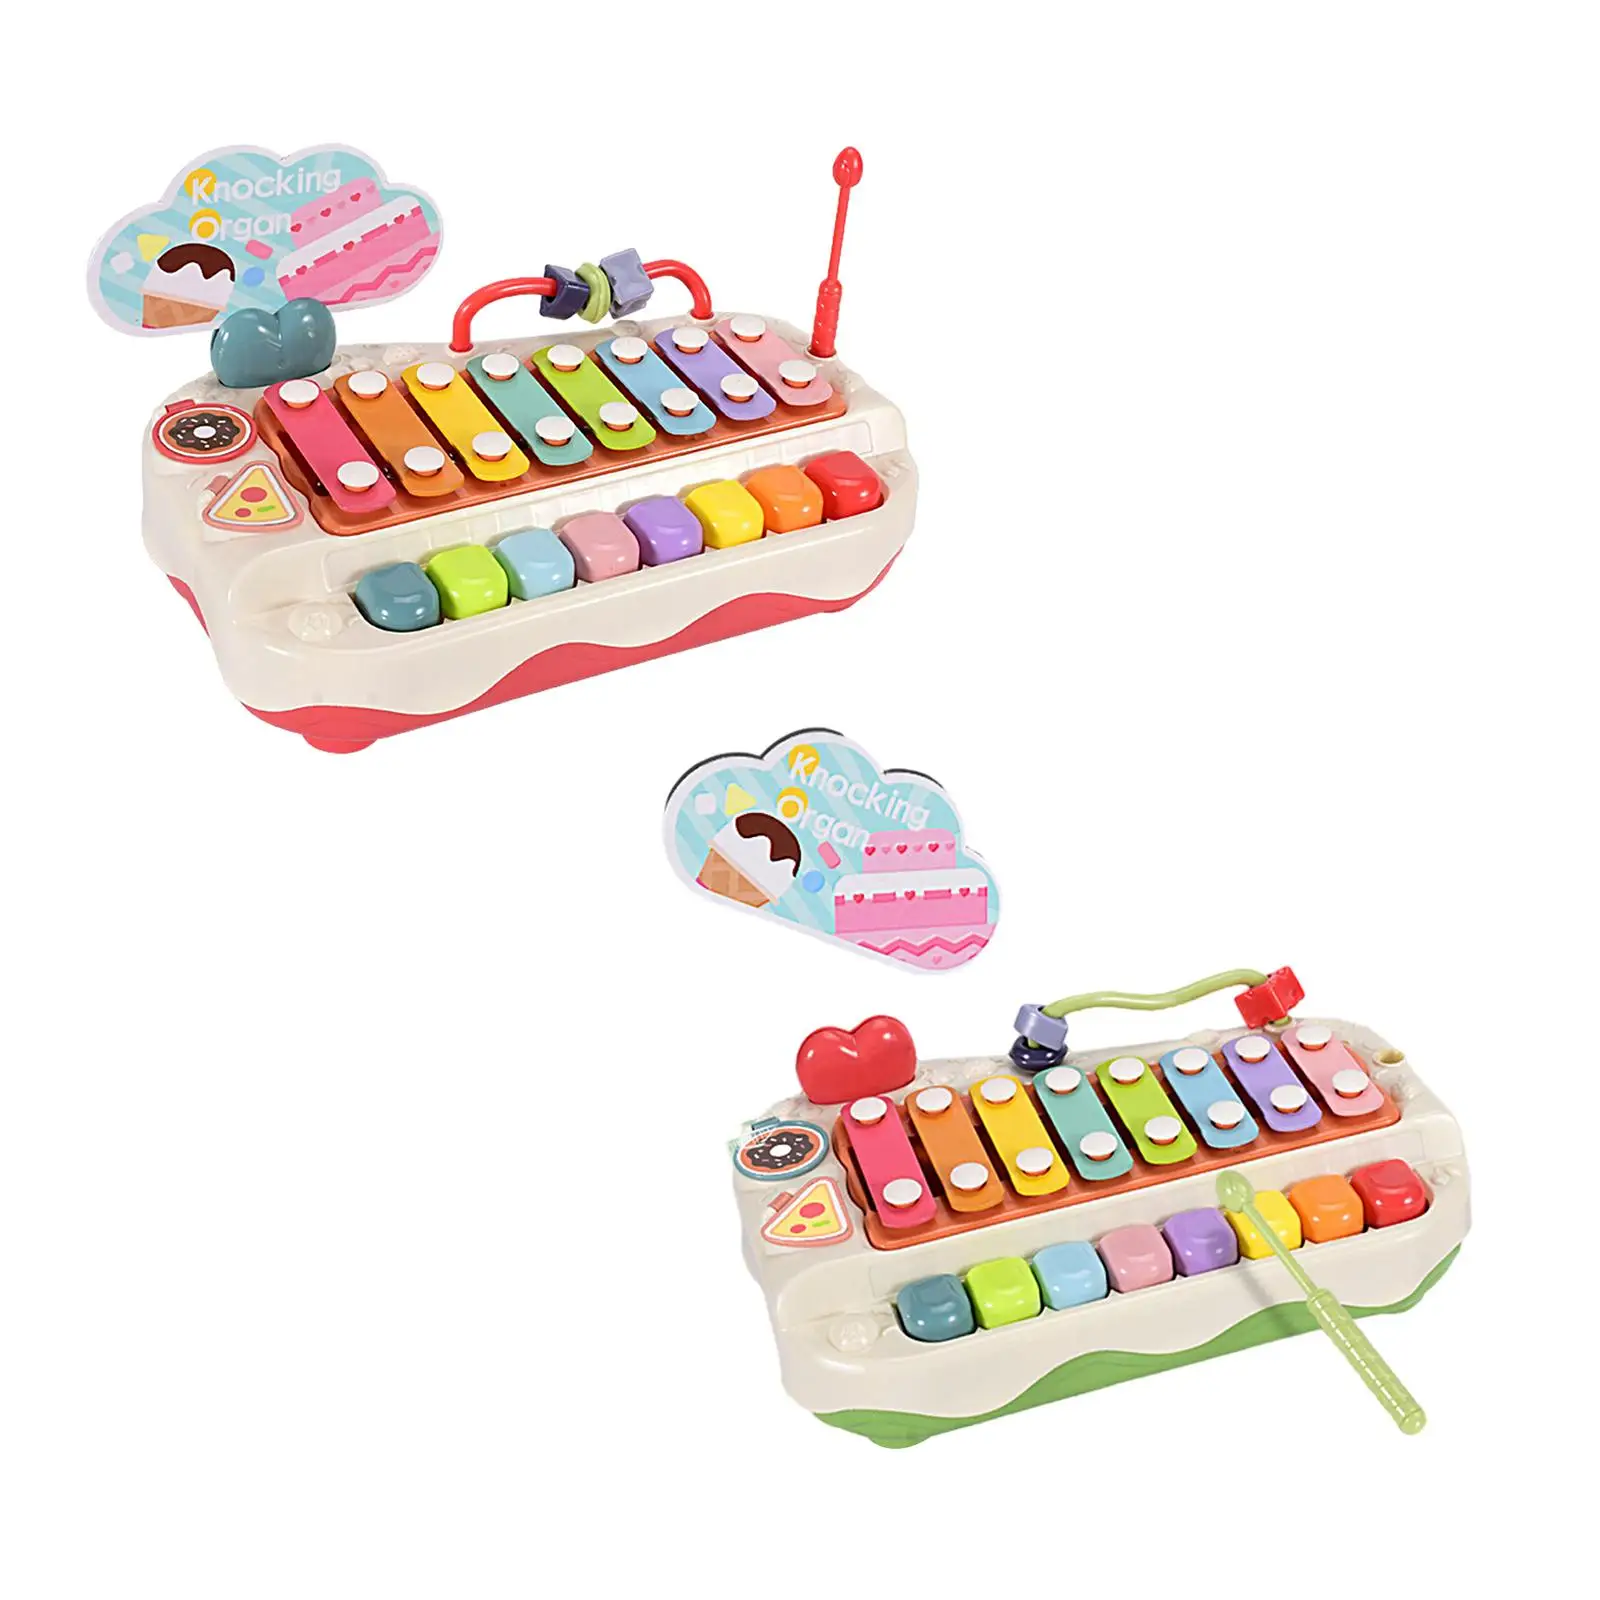 Kids Musical Toy Multicolored Piano Toy Musical Instrument Toy for Baby 1 2 3 Years Old Kids Boy Girls Toddler Birthday Gift